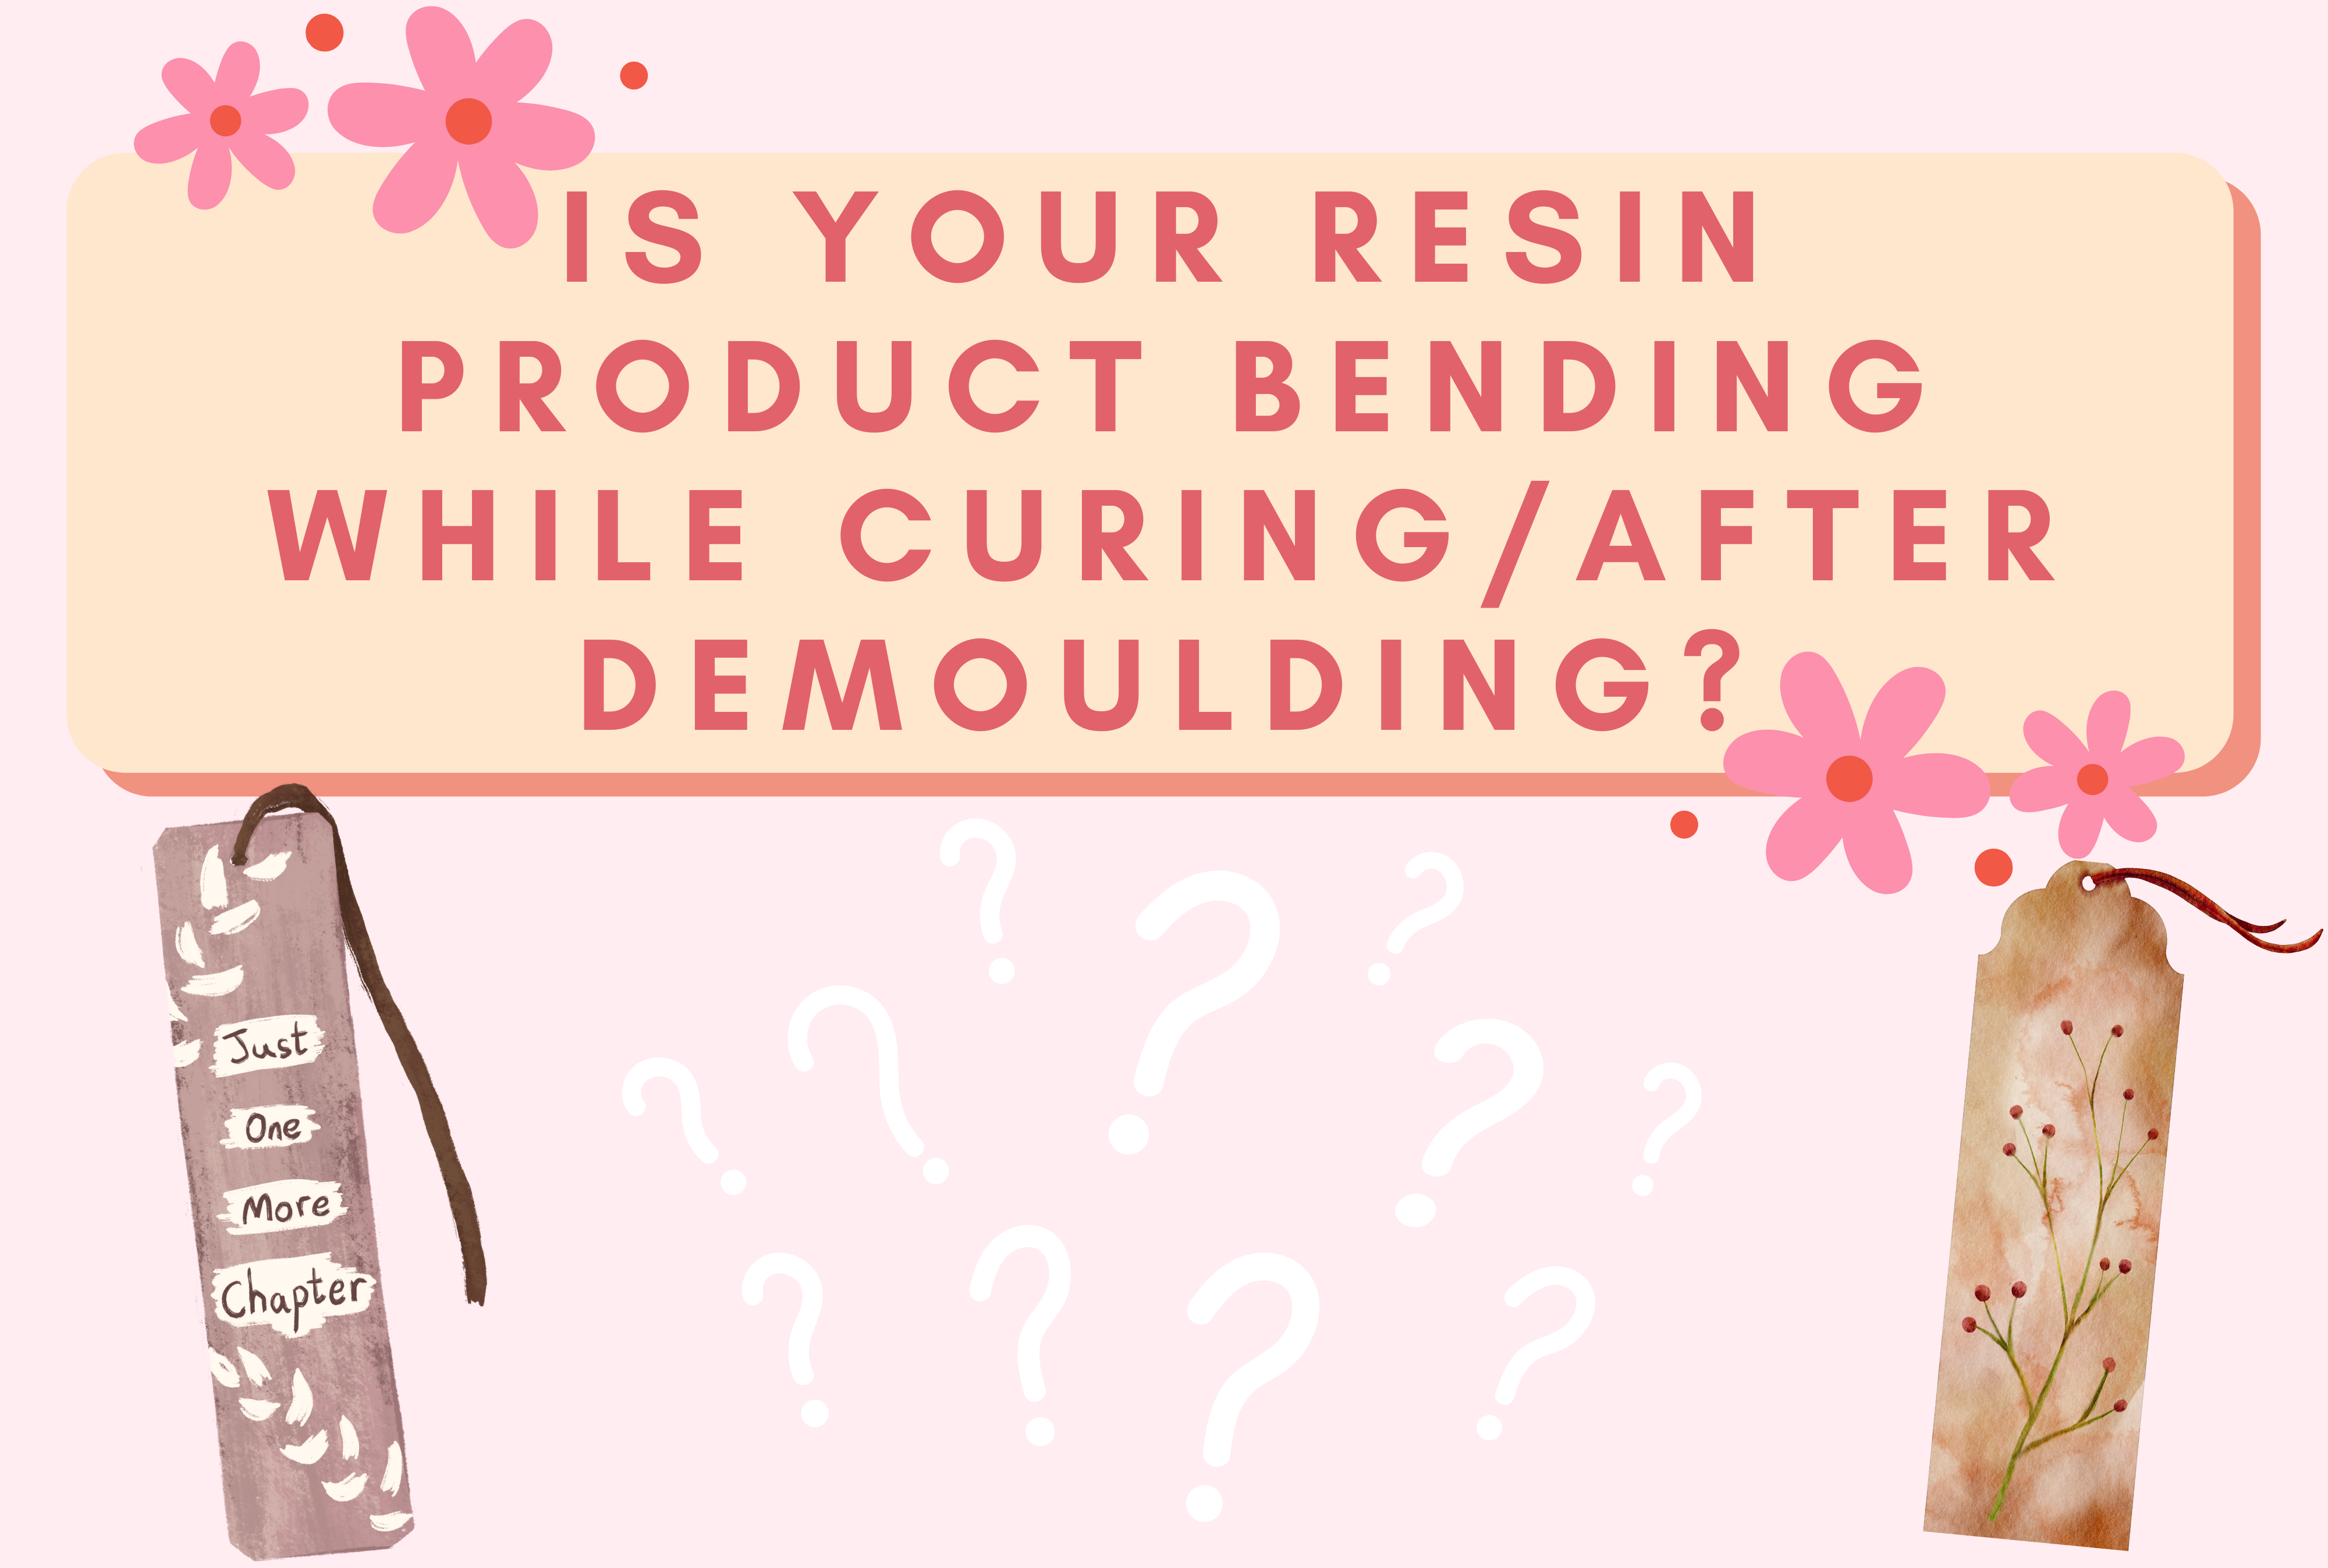 Is your resin product bending while curing/after demoulding?